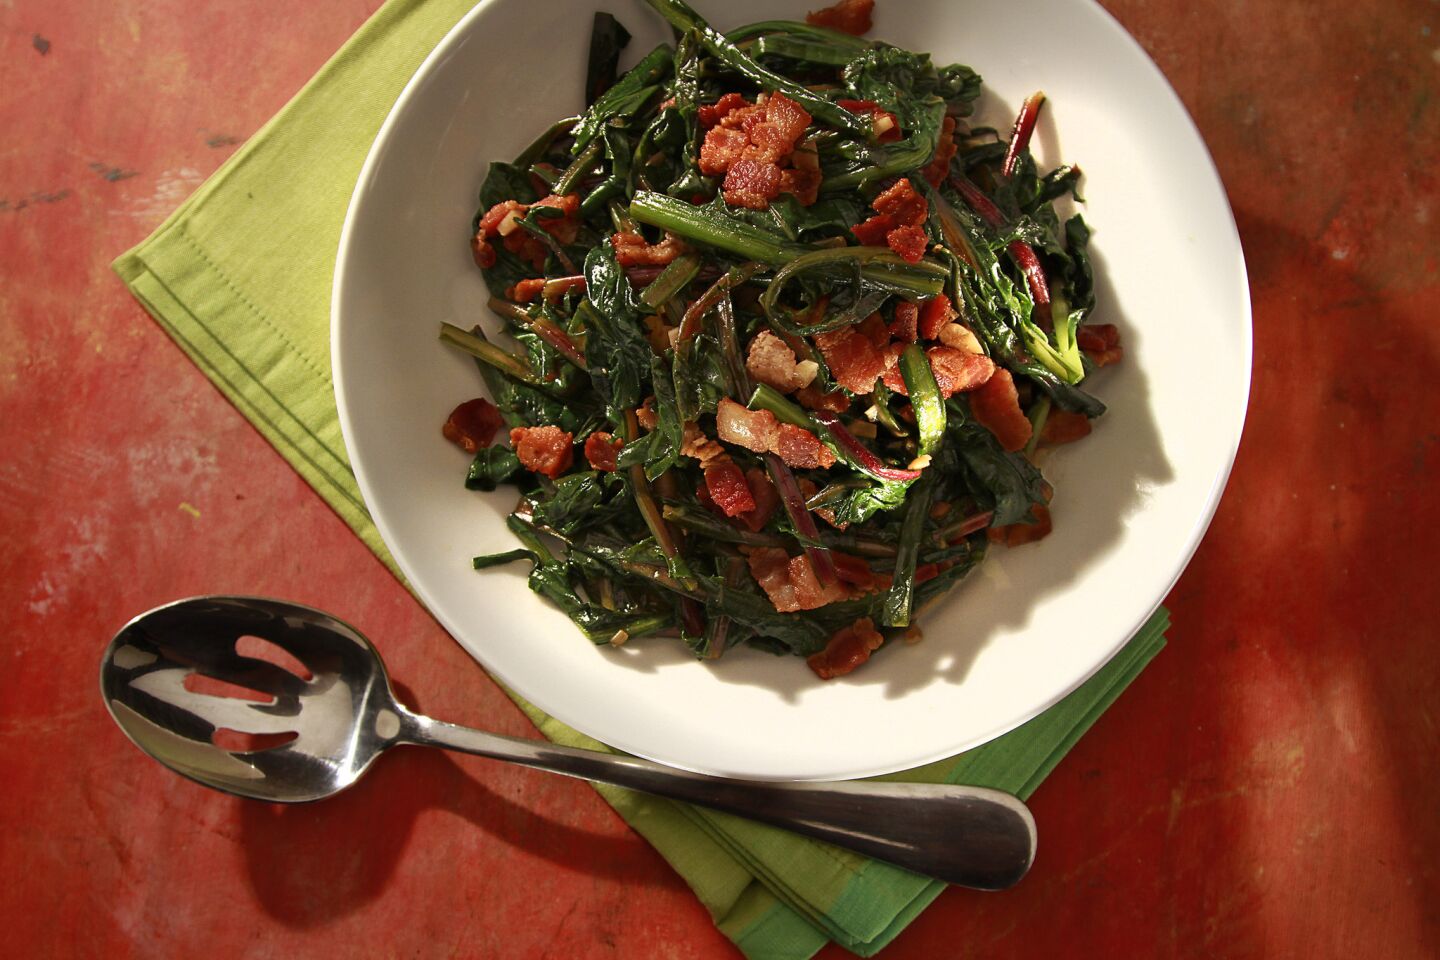 Dandelion greens and bacon are a natural combination. Recipe: Wilted dandelion grens with bacon